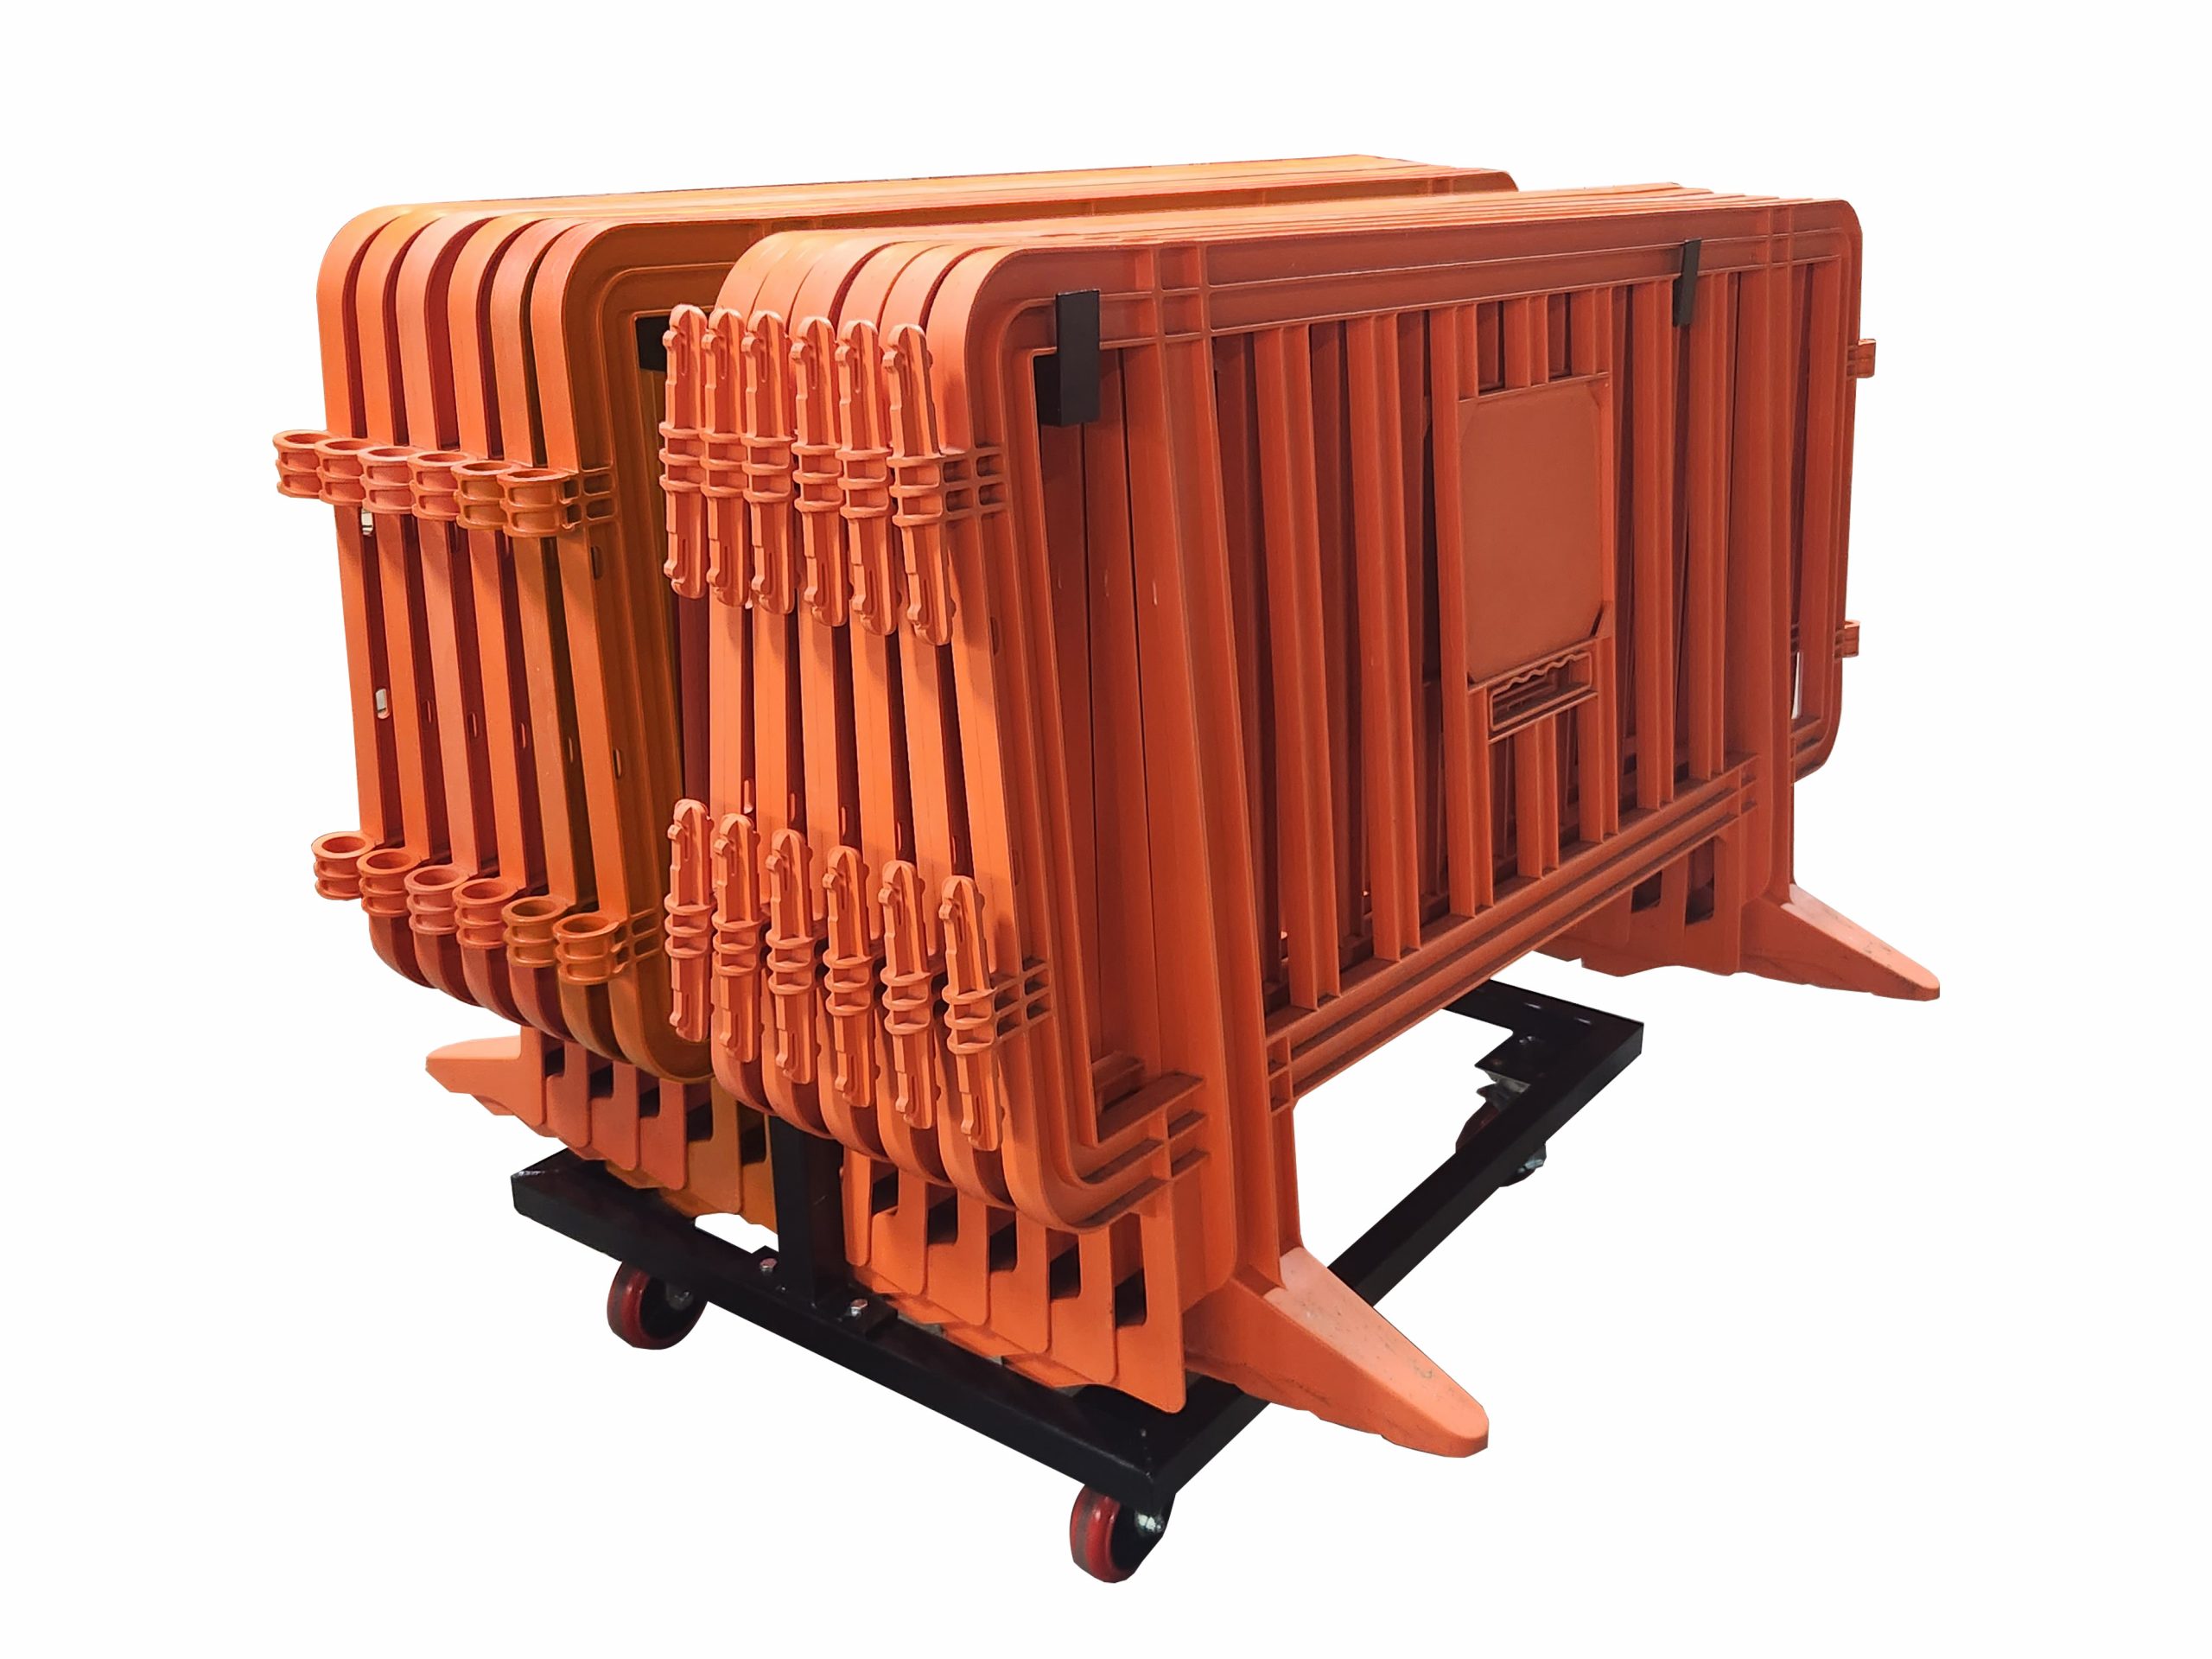 Plastic Barricade Cart With Plastic Barricades Loaded